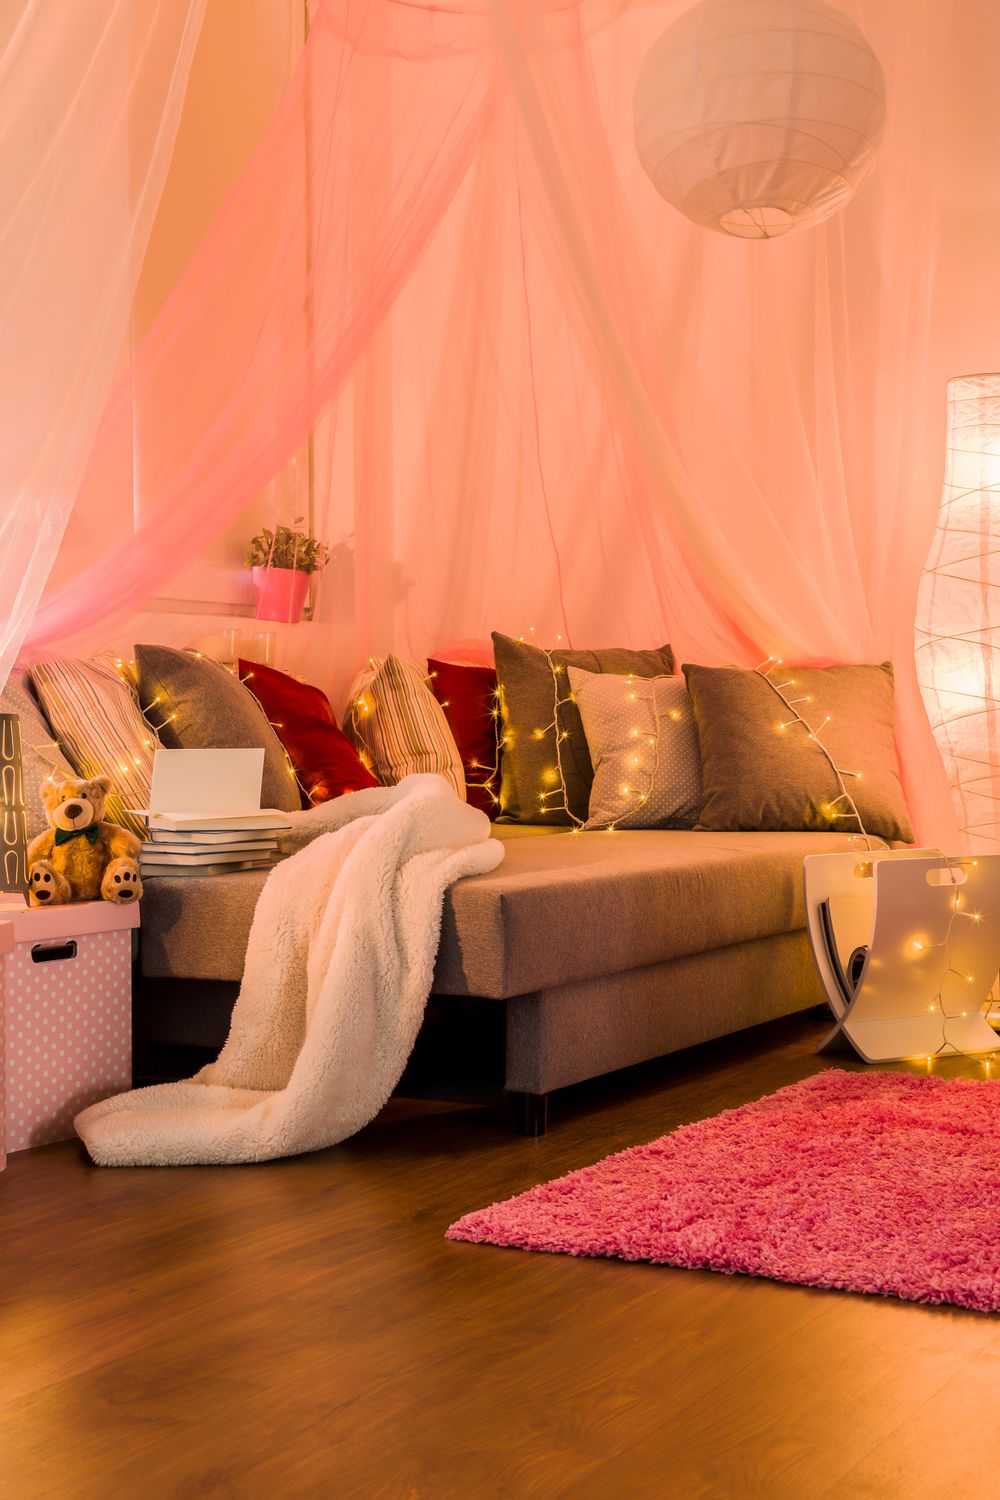 Romantic bed canopy with lights 